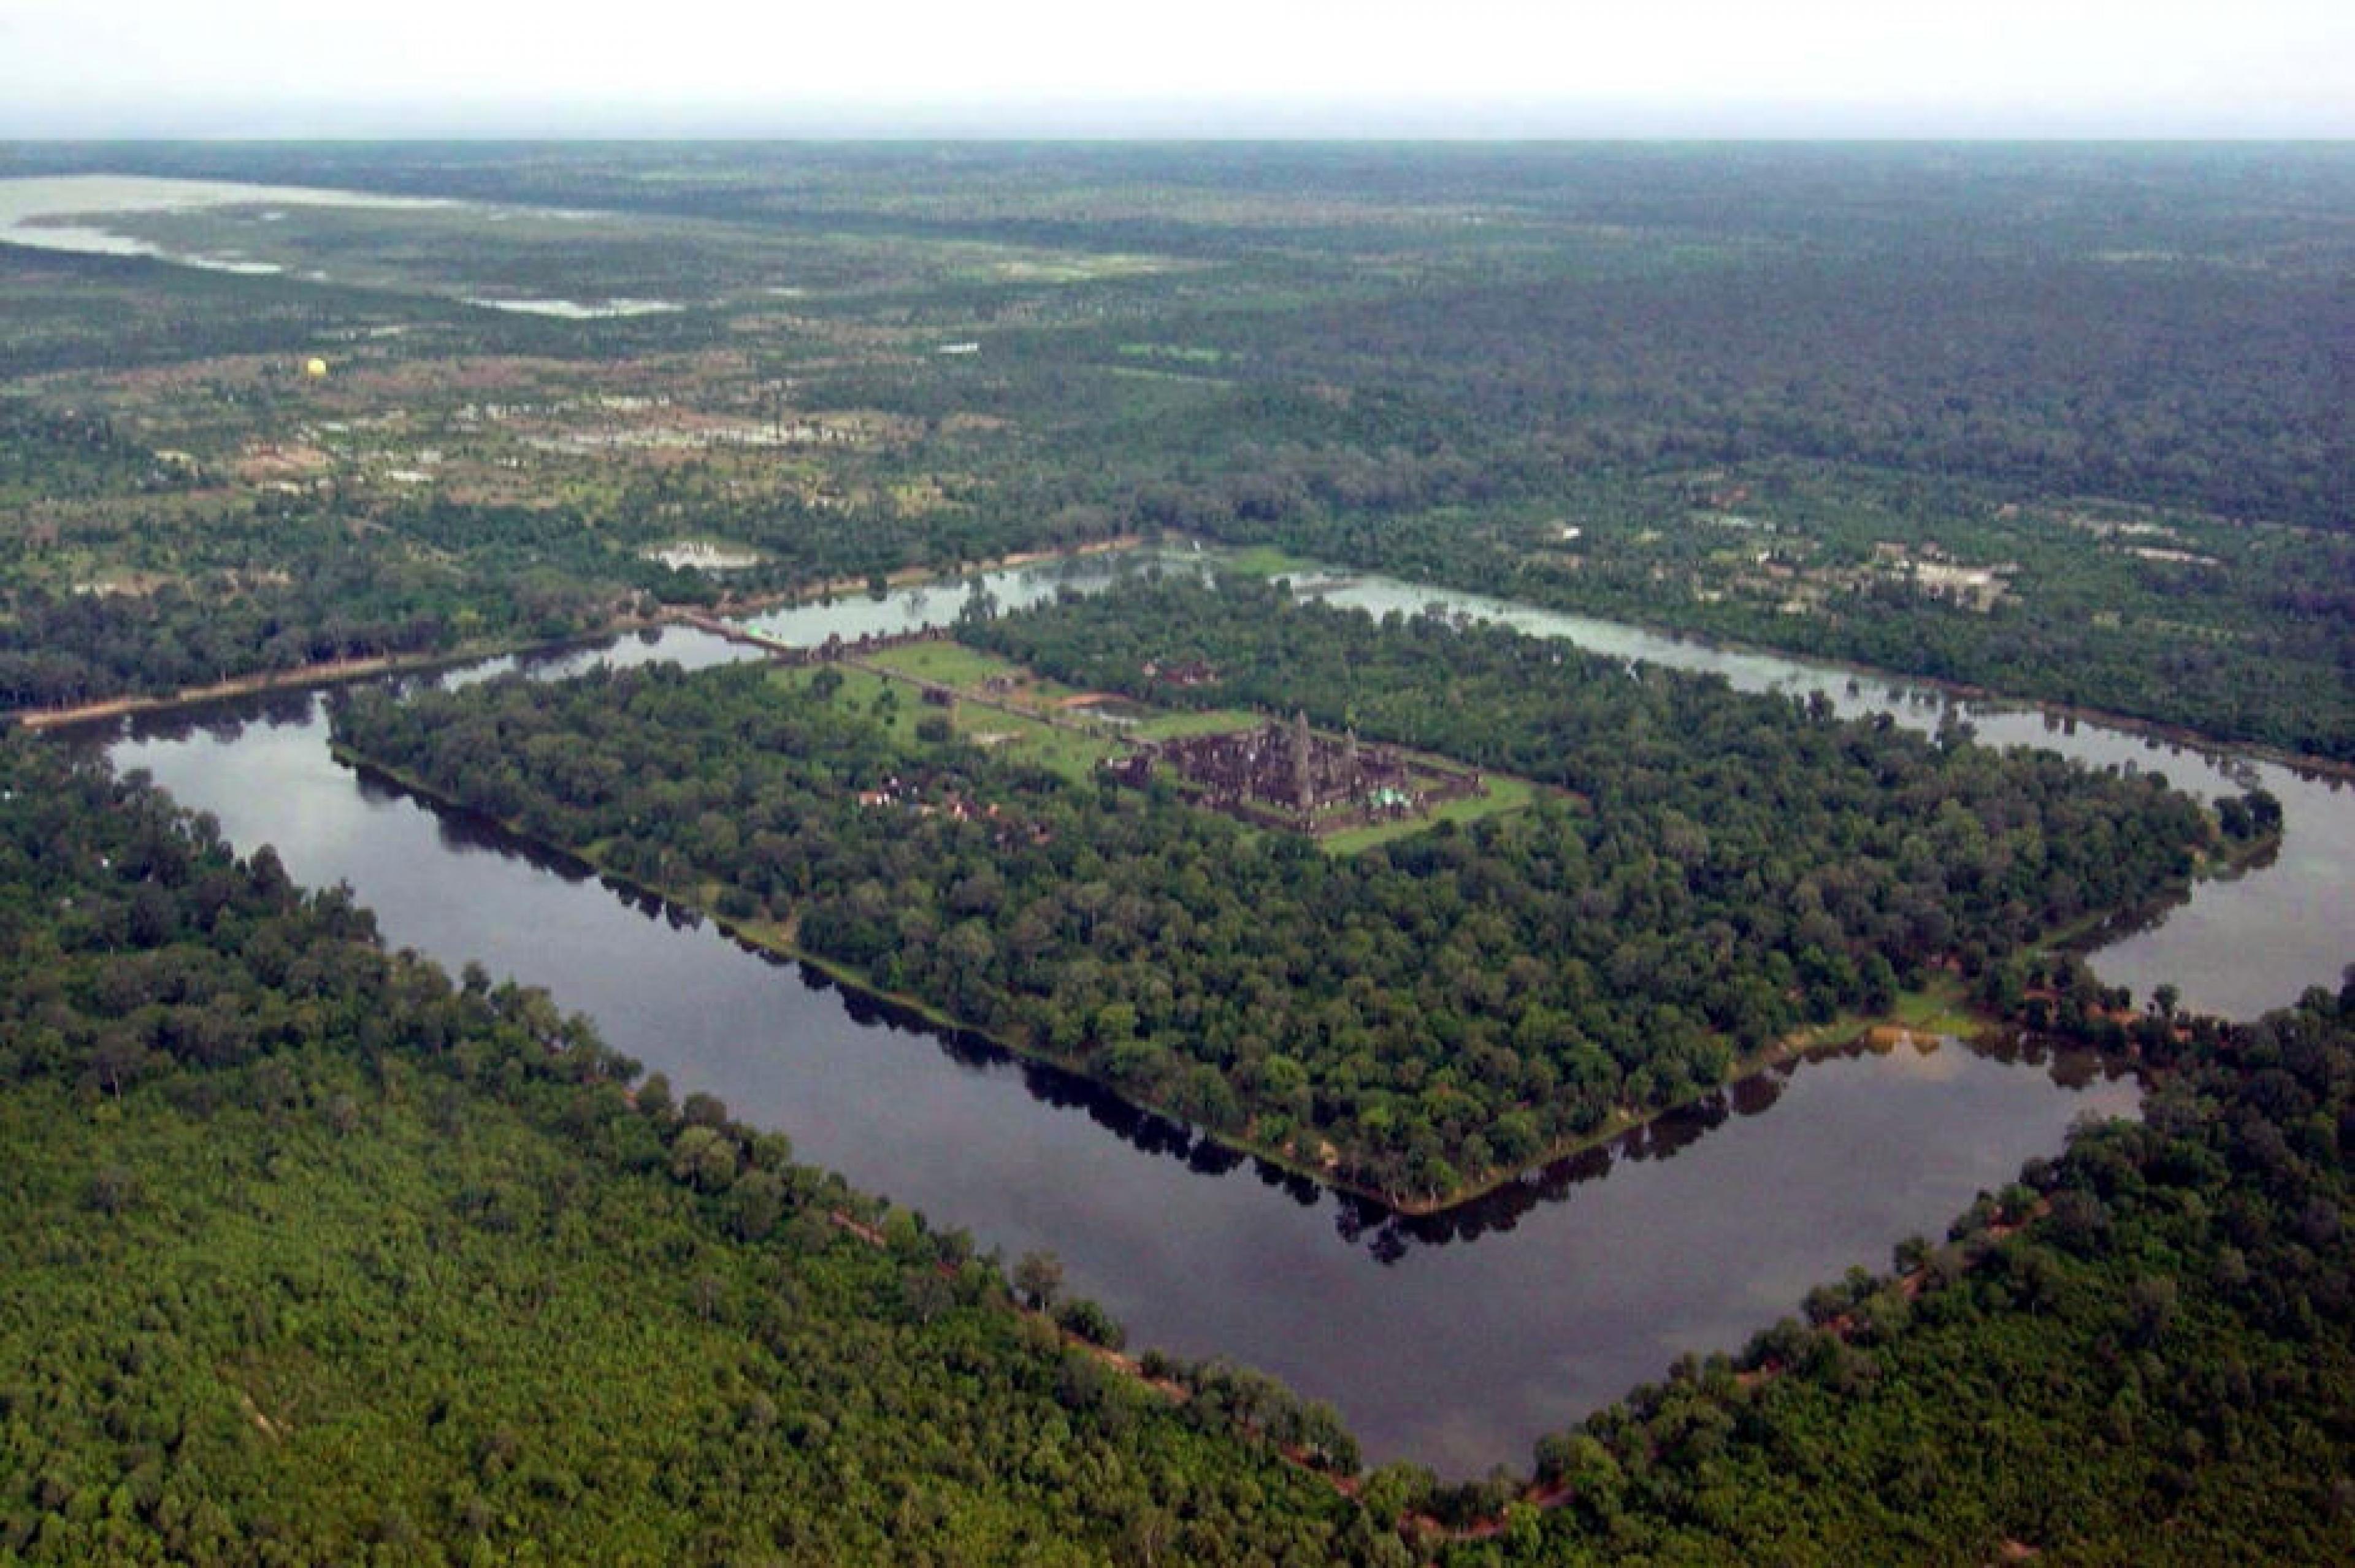 Aerial View - Indagare Tours: Helicopter Excursions,Siem Reap, Cambodia - Courtesy of Charles J. Sharp